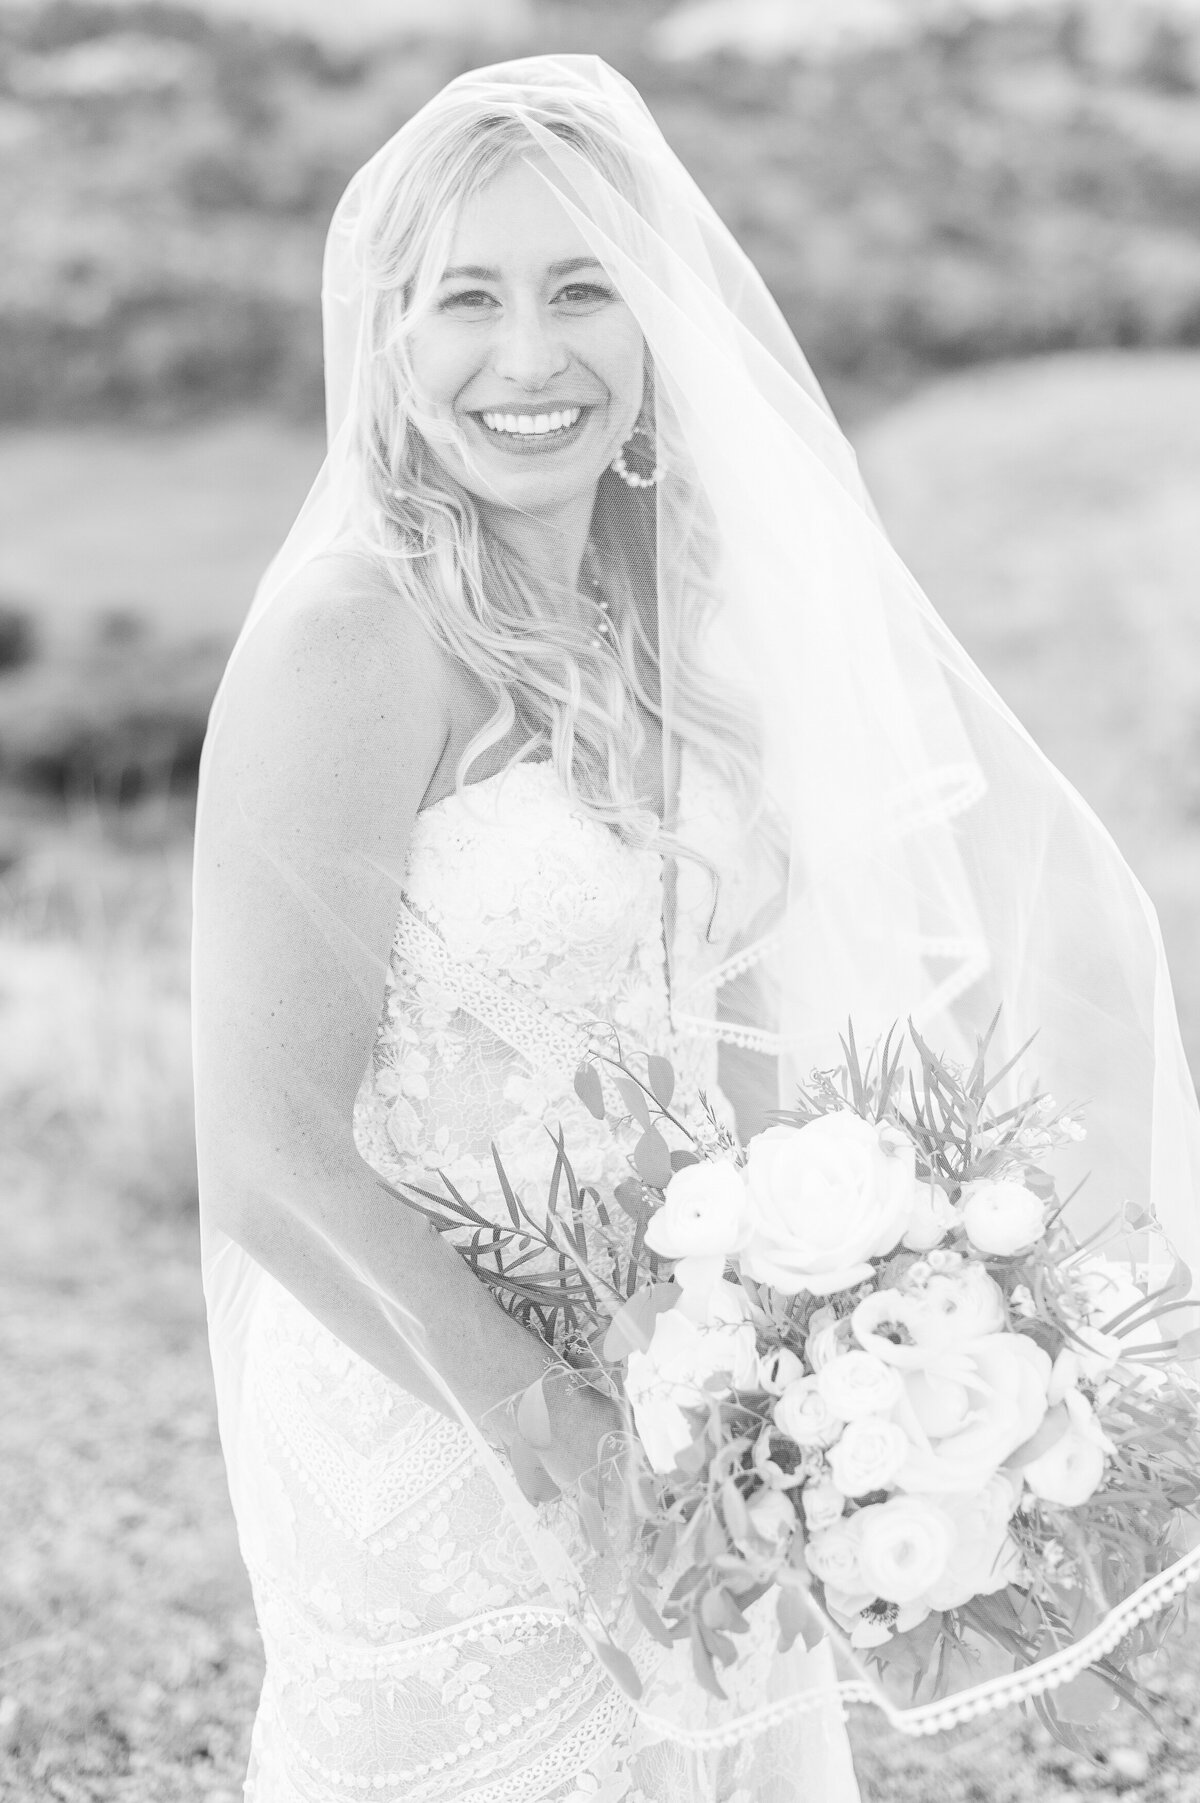 Black and white portrait of a smiling bride on her wedding day.